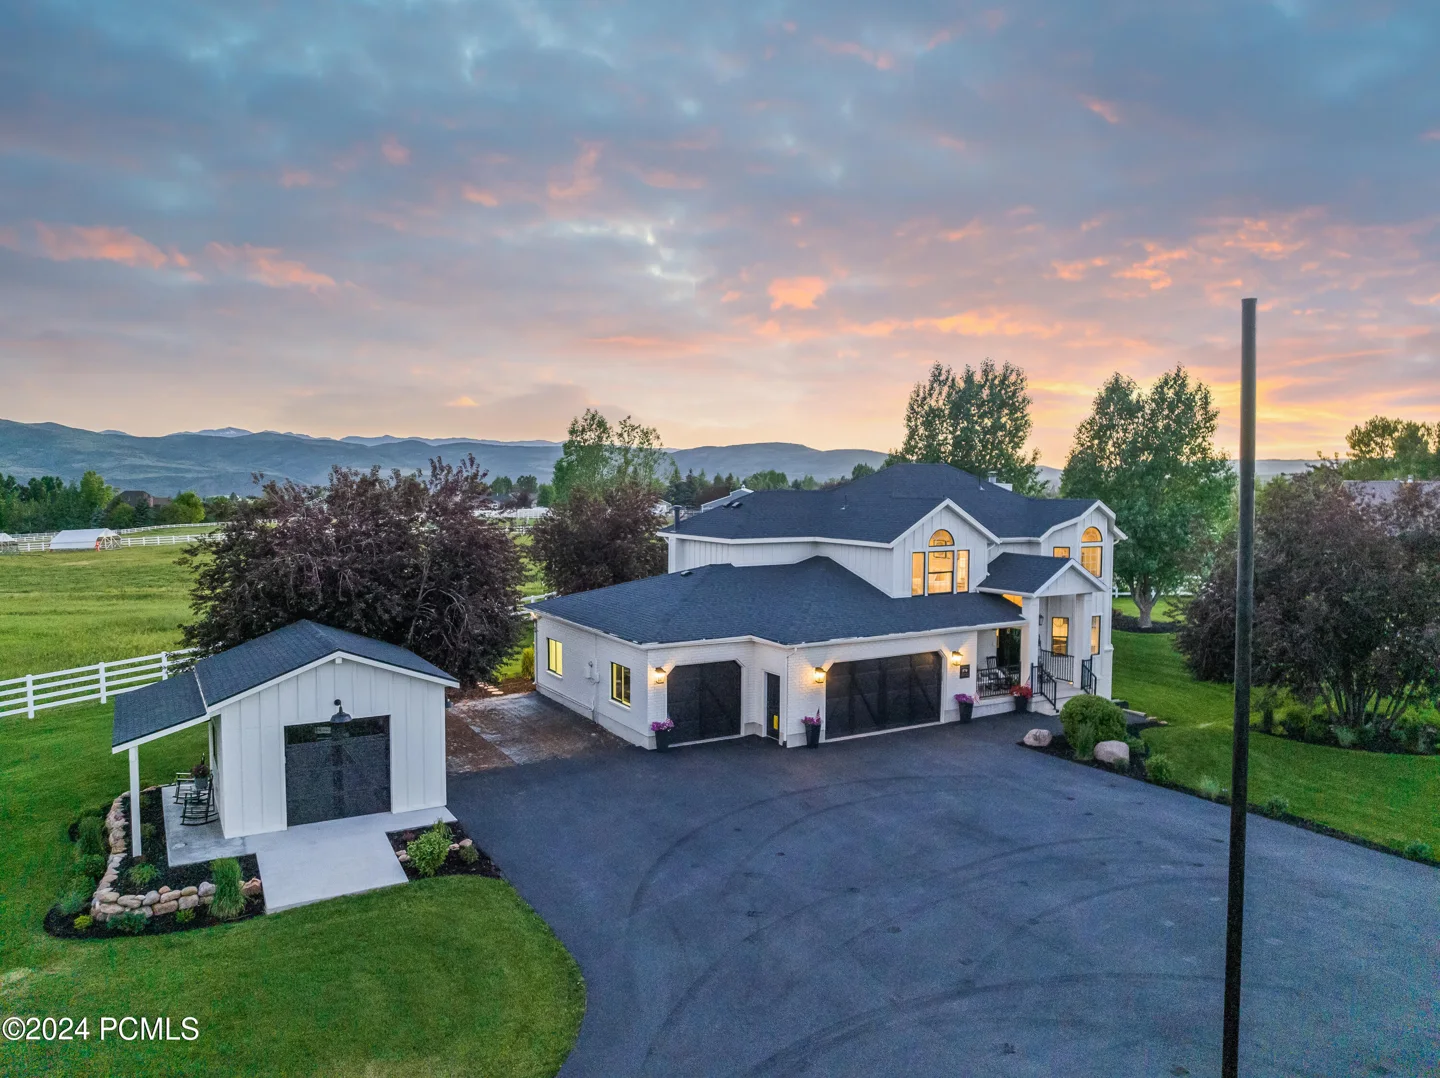 Remodeled Estate with Kamas Valley Views